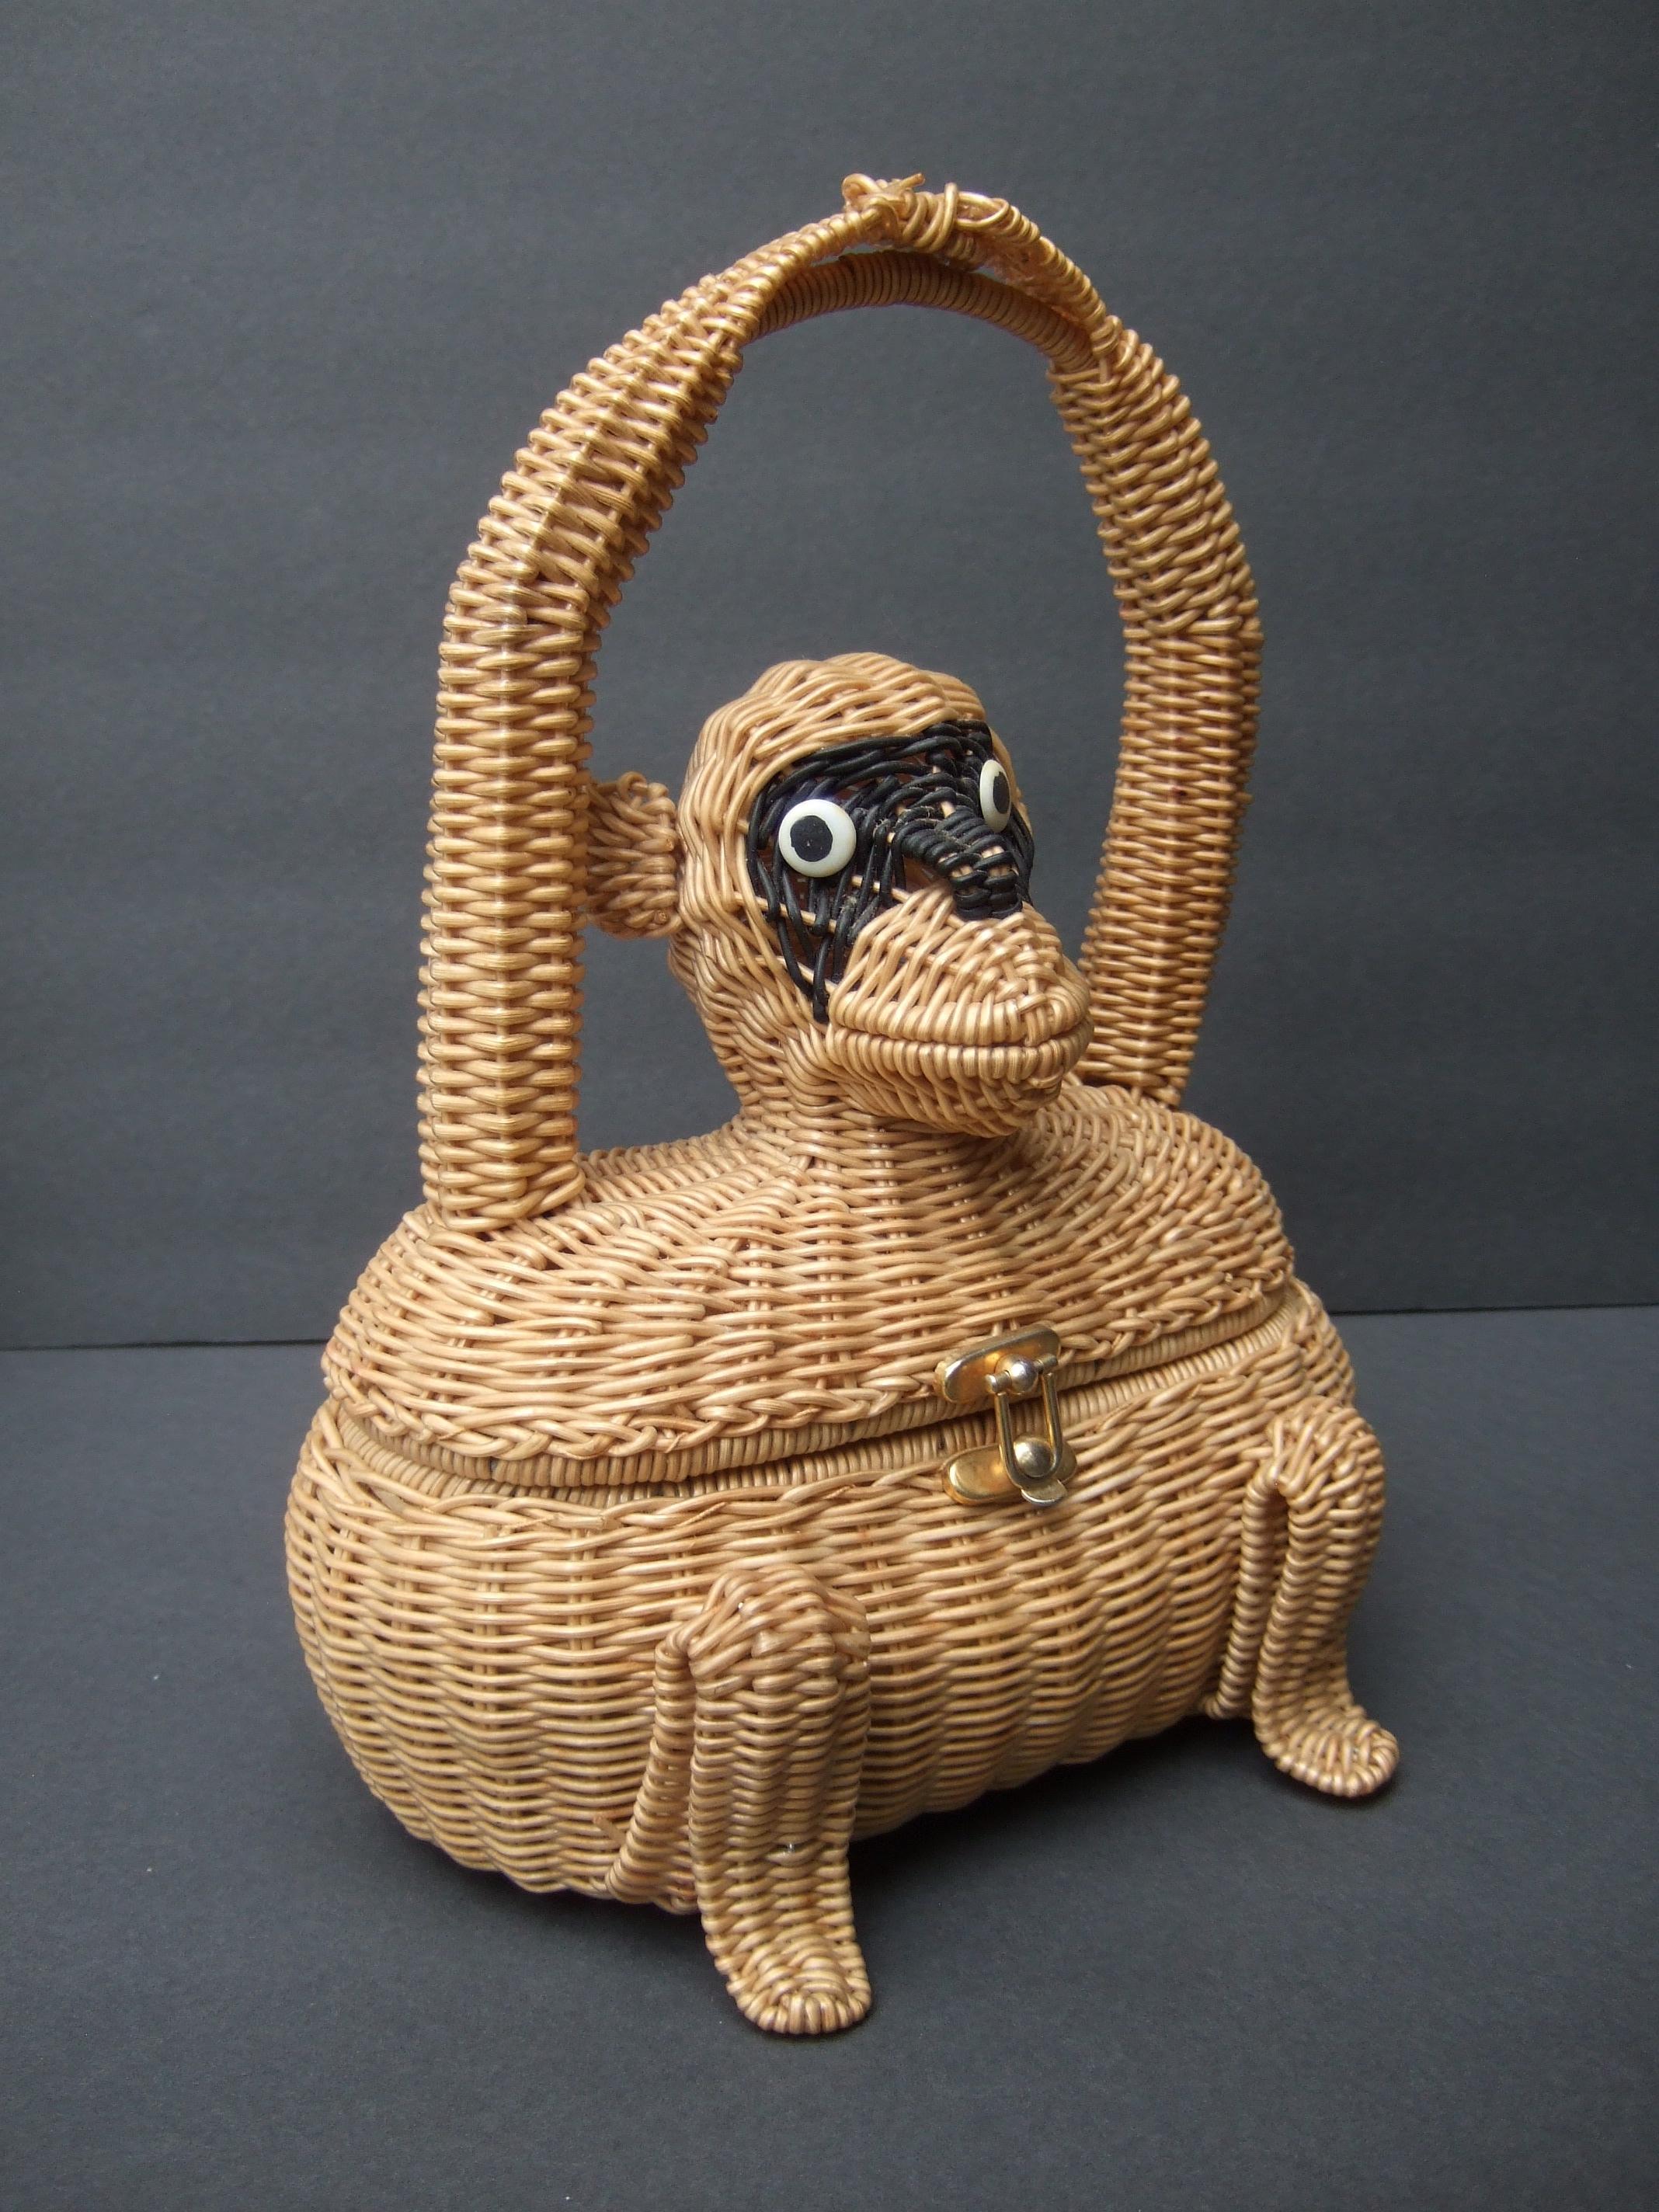 Whimsical Very Rare Wicker Monkey Handbag Designed by Marcus Brothers c 1960 For Sale 2